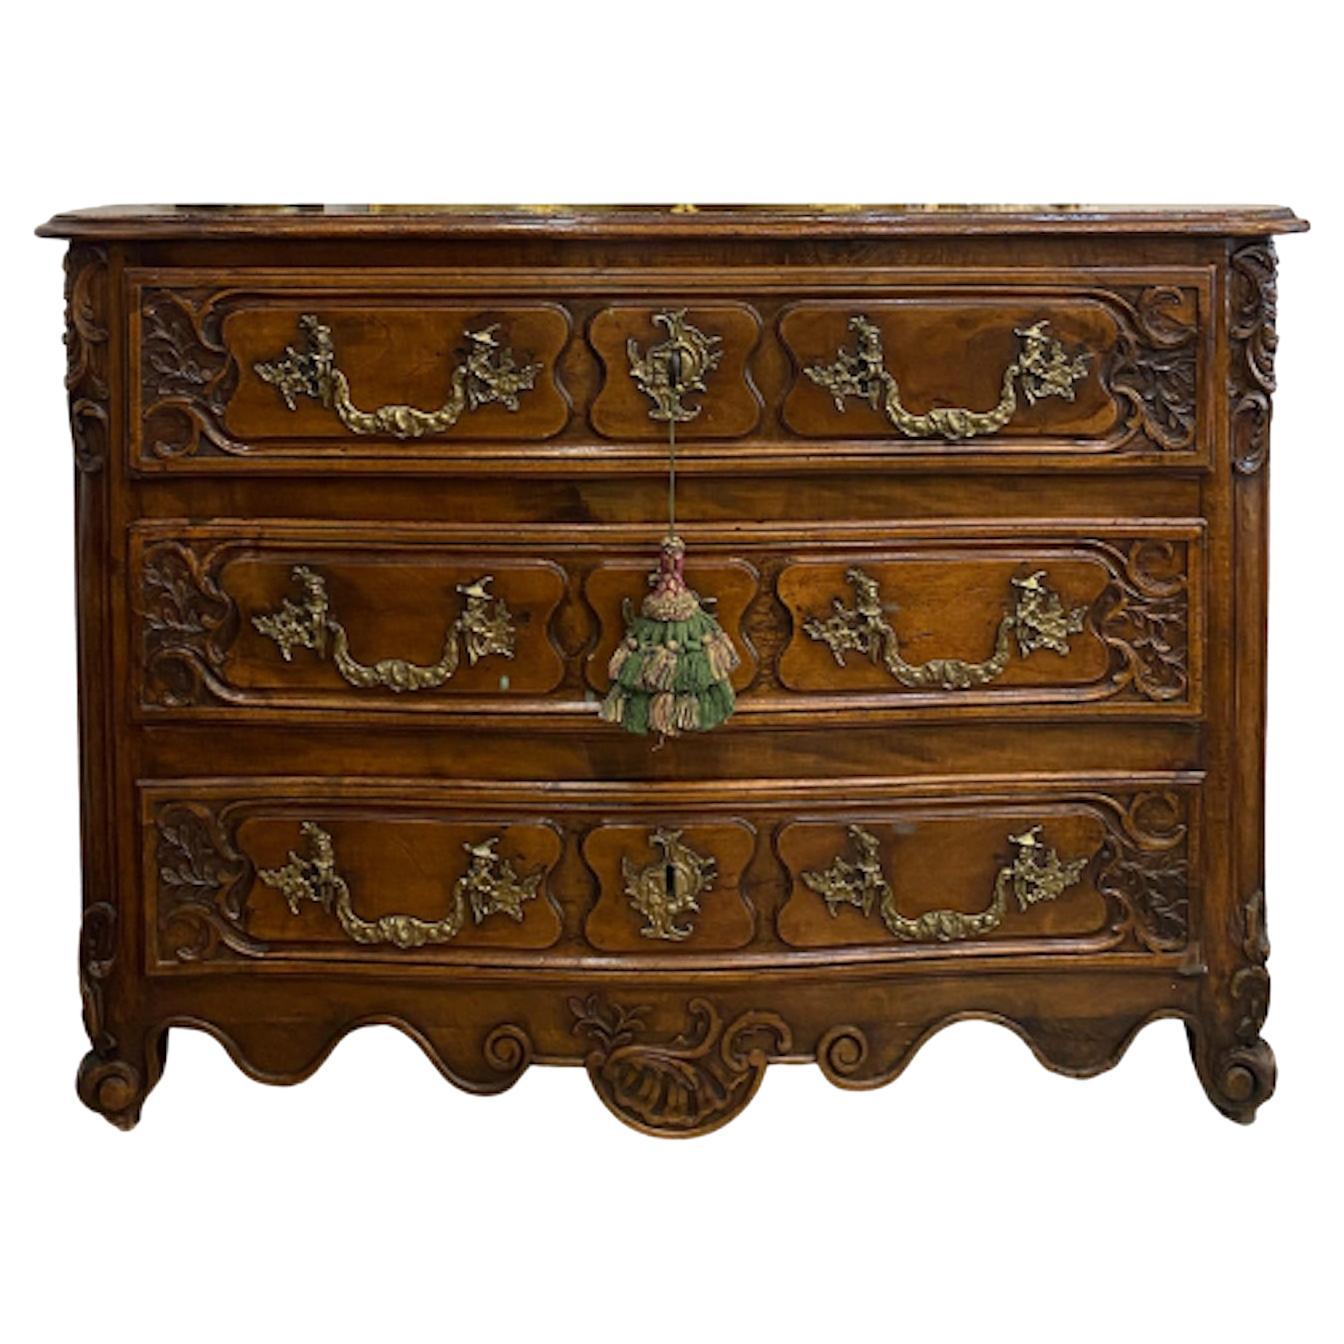 18th Century Late Régence / Early Louis XV Period Commode For Sale